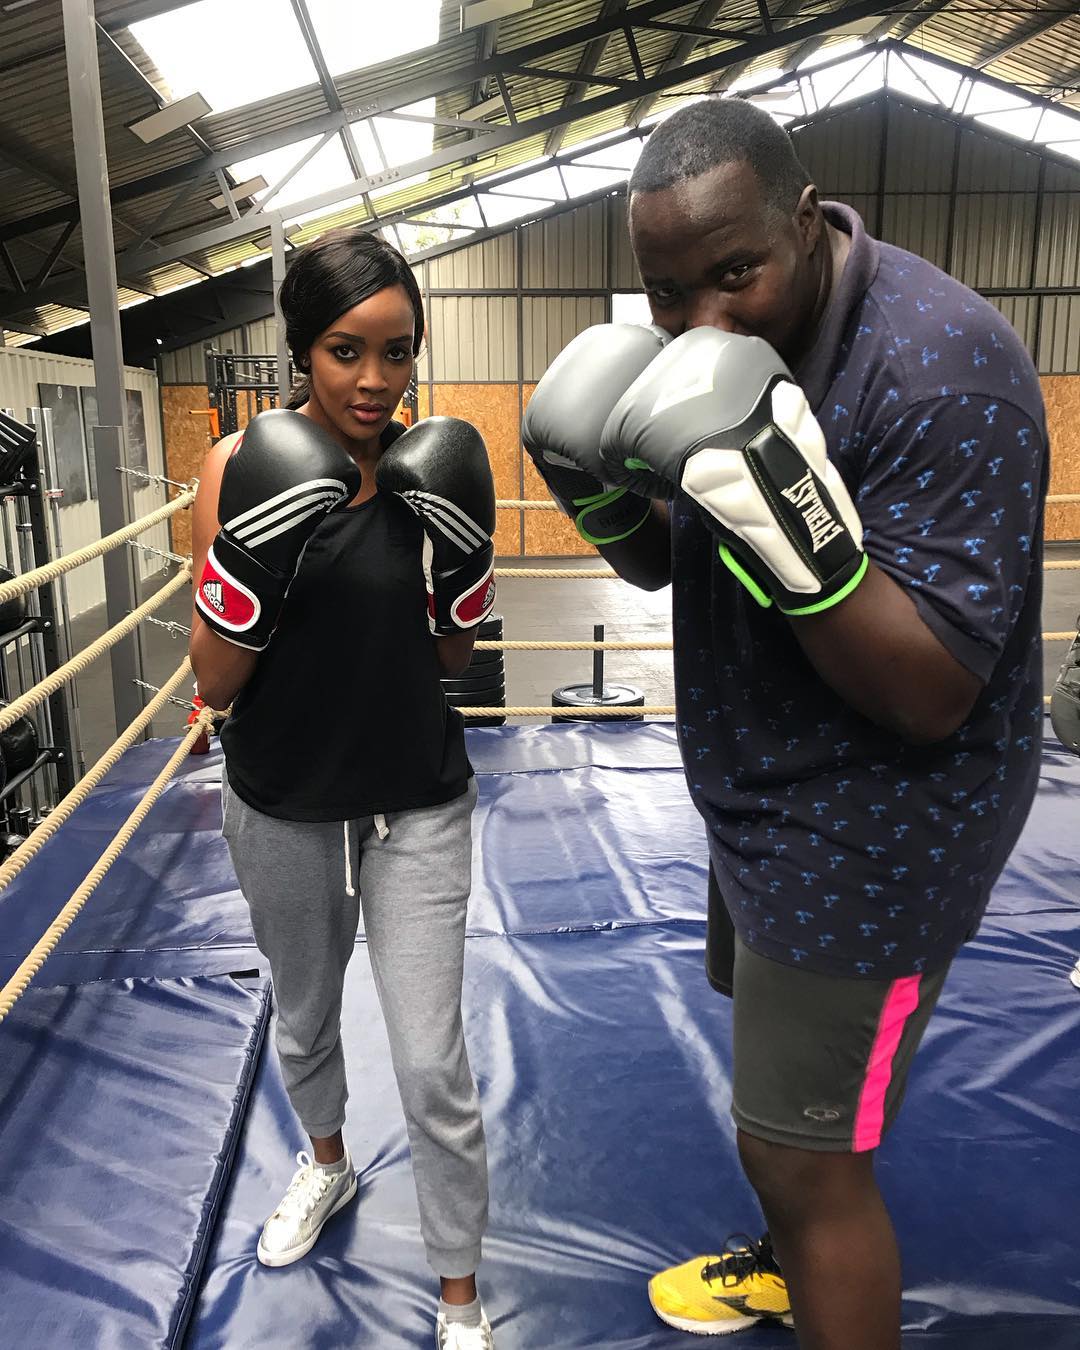 2018-08-15-Willis Raburu And Joey Muthengi: Kellywood Celebs Fighting Again In 2018, Lets Settle This Beef Punch For Punch!